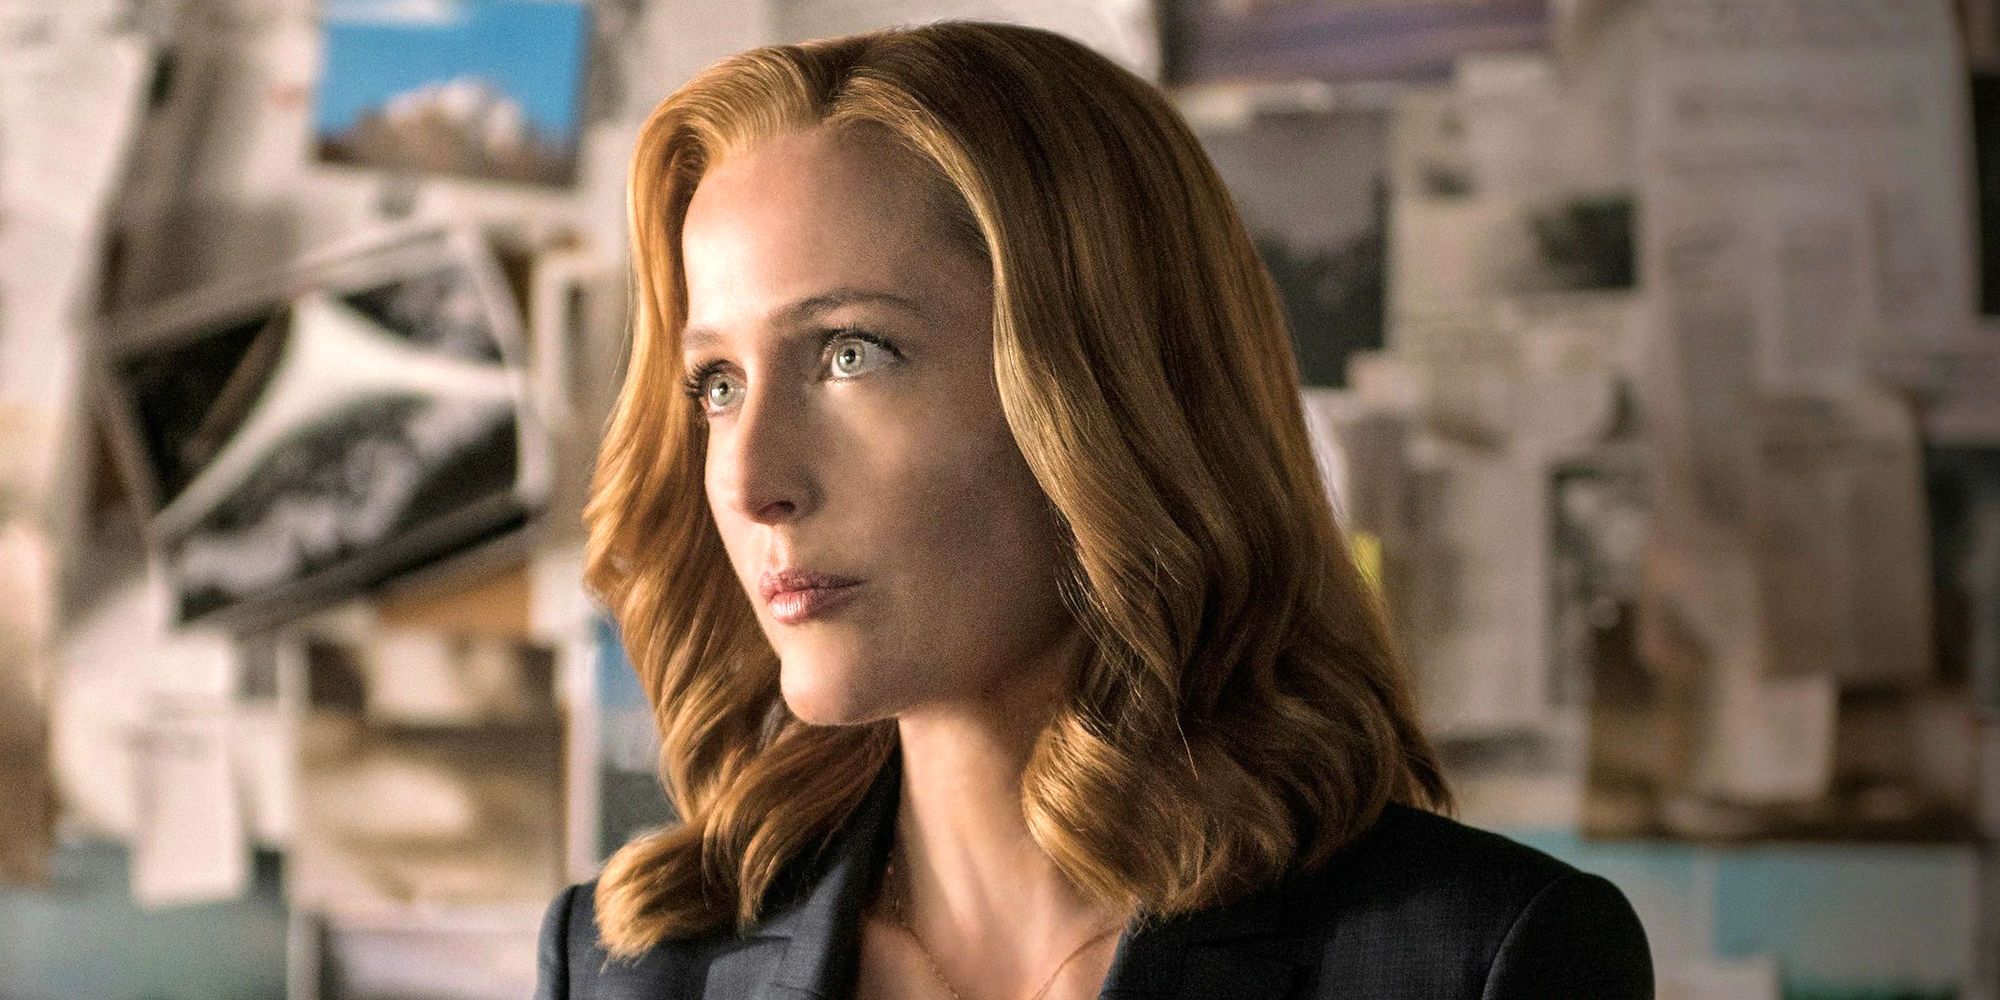 The X Files Gillian Anderson as Scully in Season 10